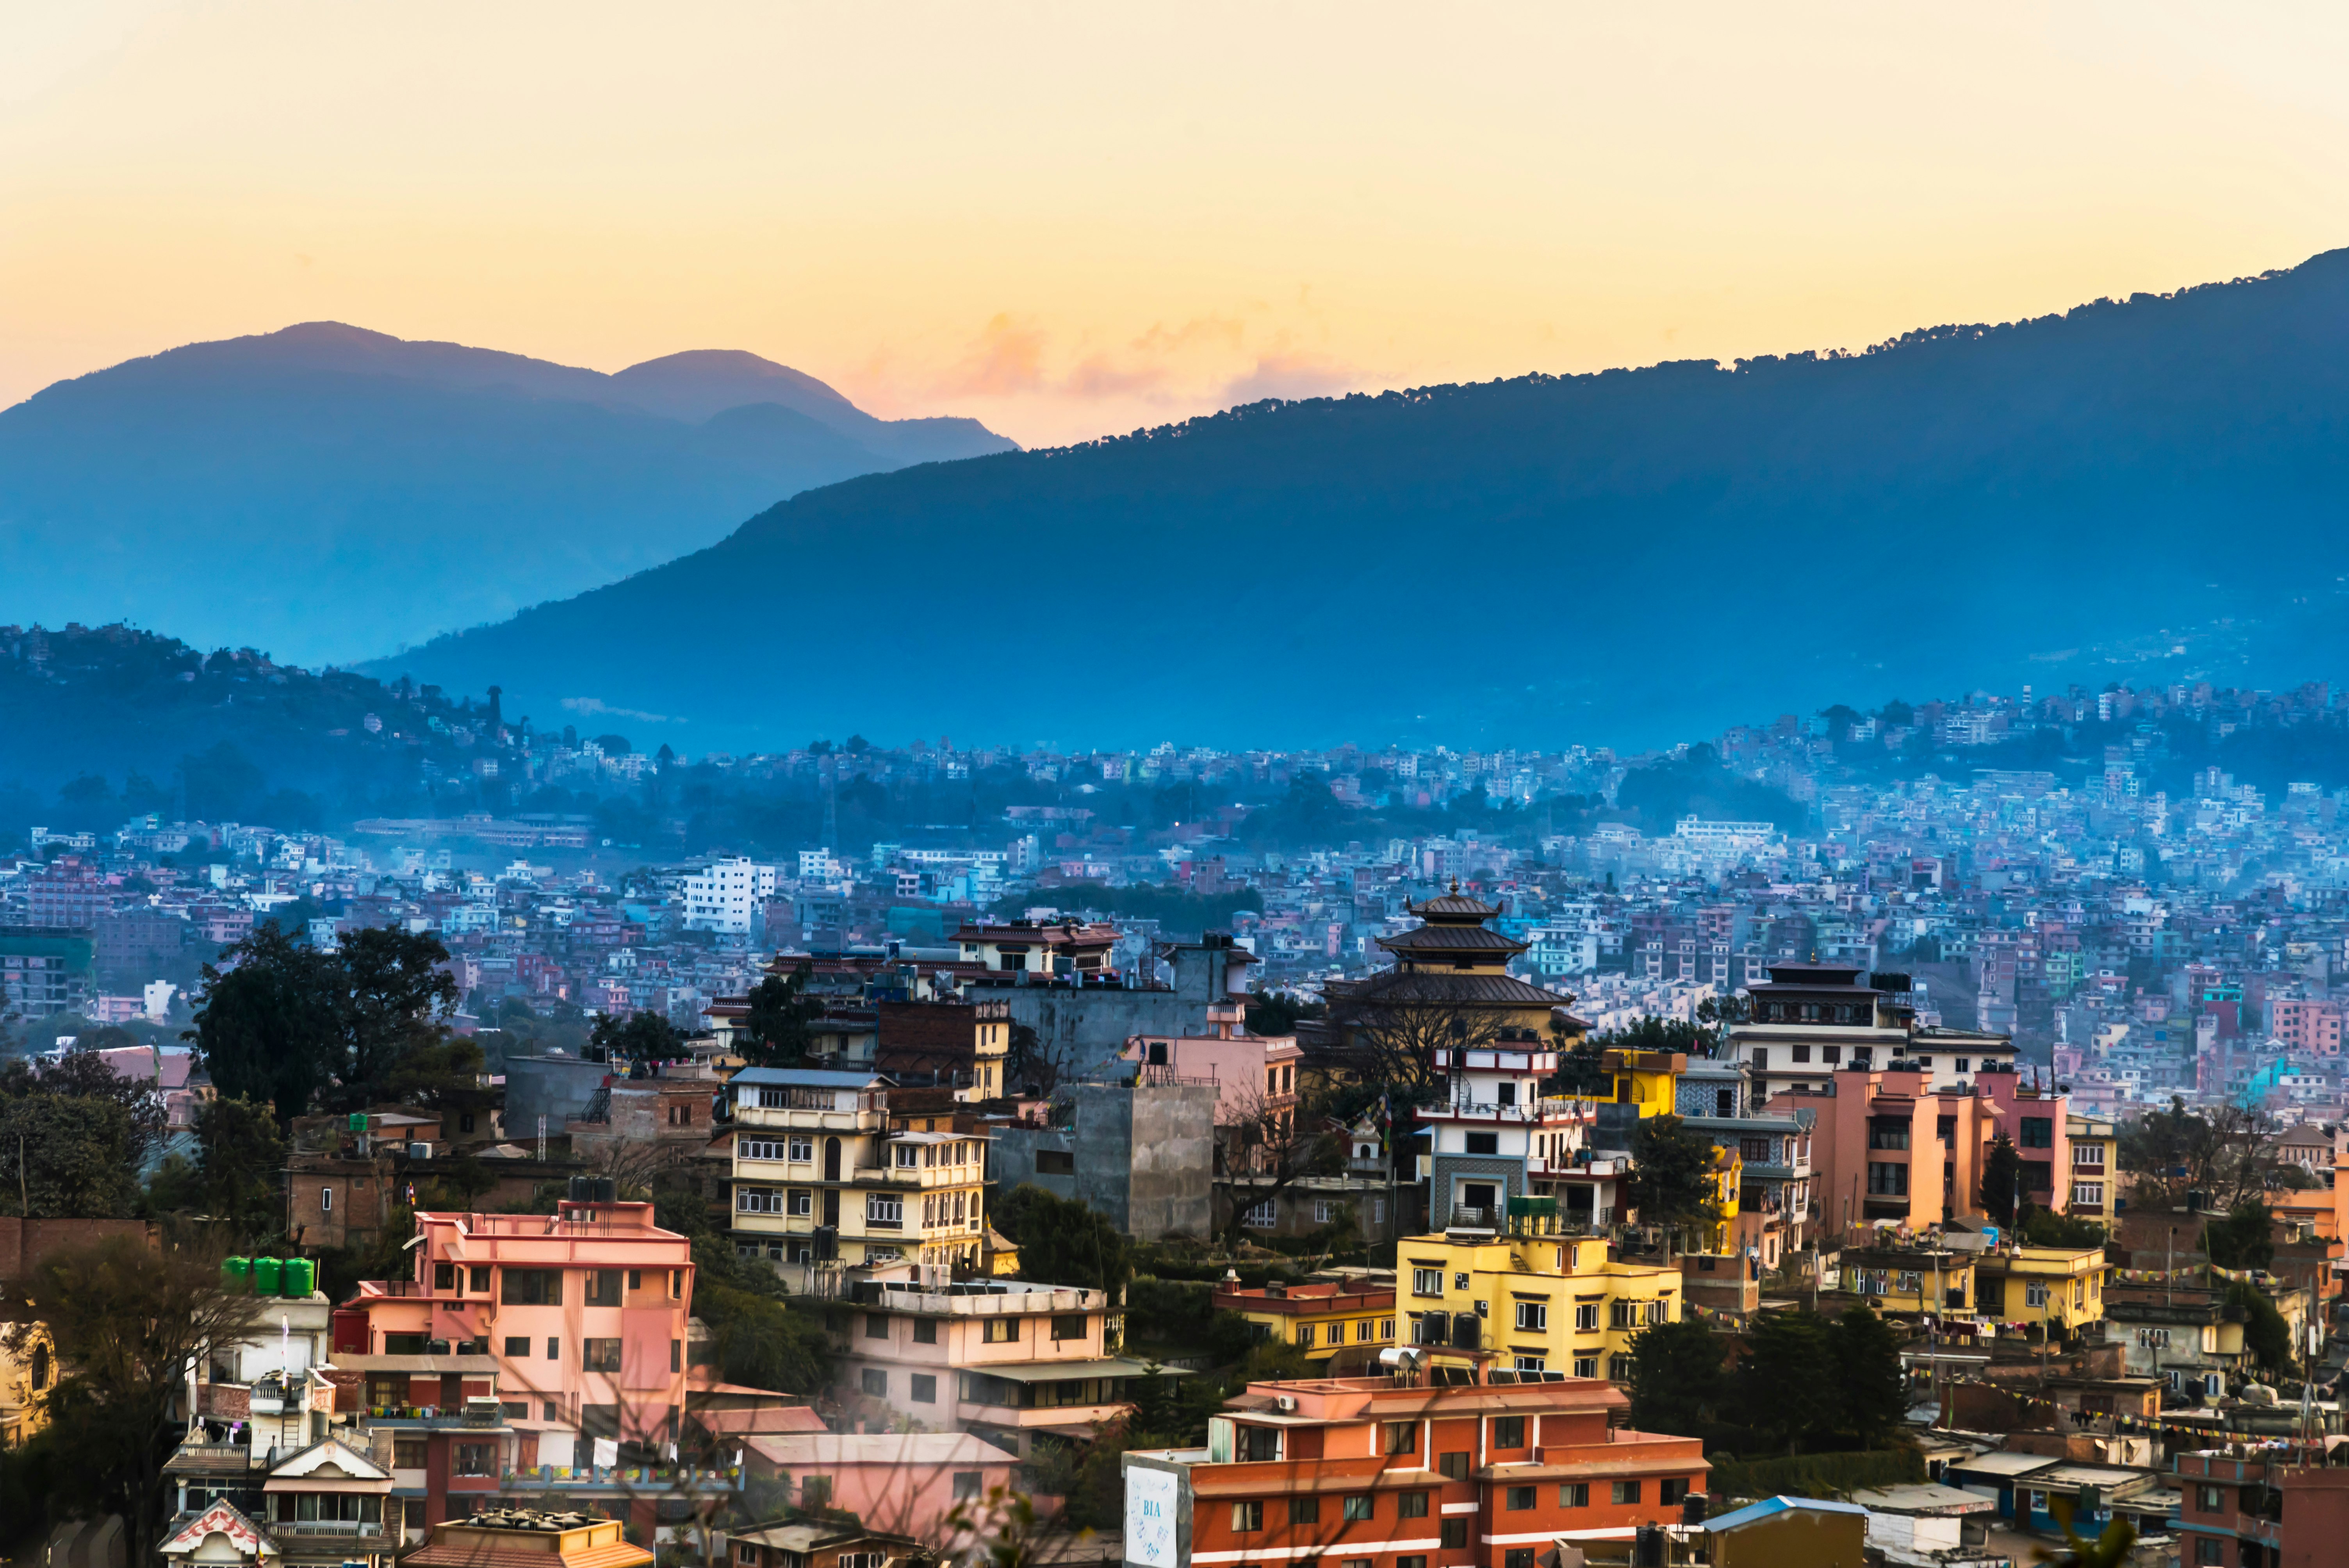 The Kathmandu city skyline. The Himalyan mountains are visible in the background